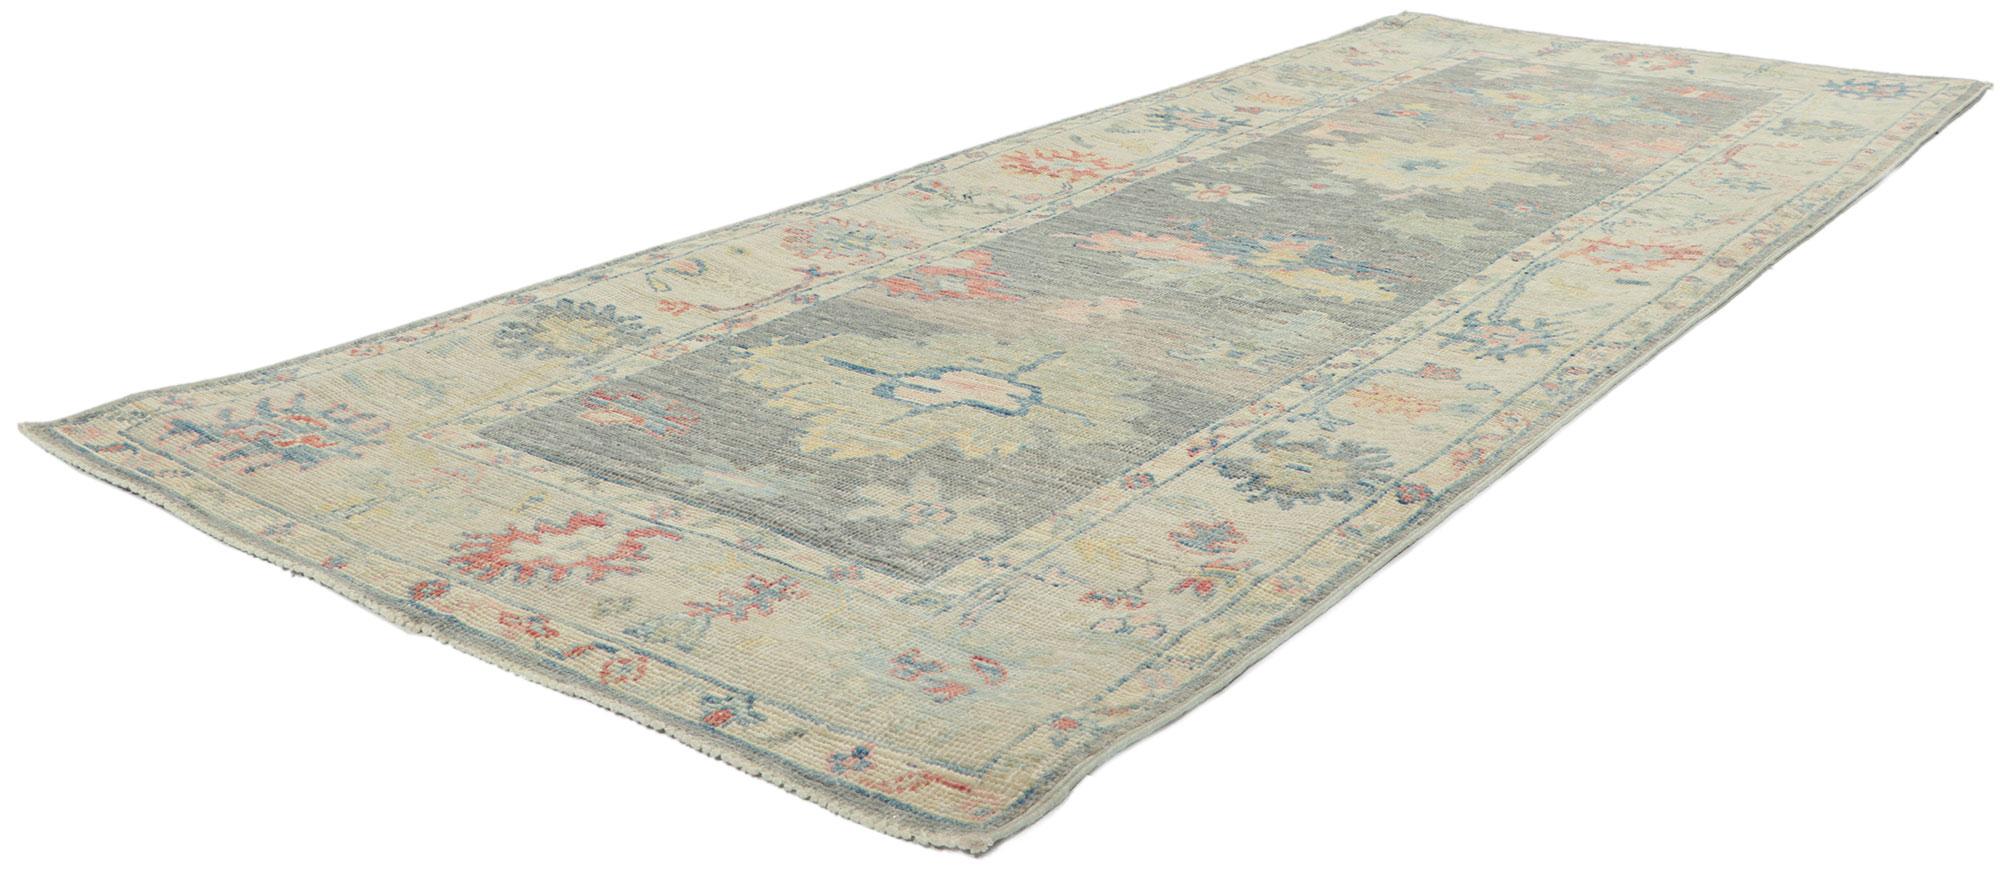 80857 new modern style oushak Runner with soft colors 03'01 x 08'01. Serene and sophisticated, this hand-knotted wool contemporary Contemporary Oushak runner beautifully embodies a modern style. The composition features an all-over botanical pattern